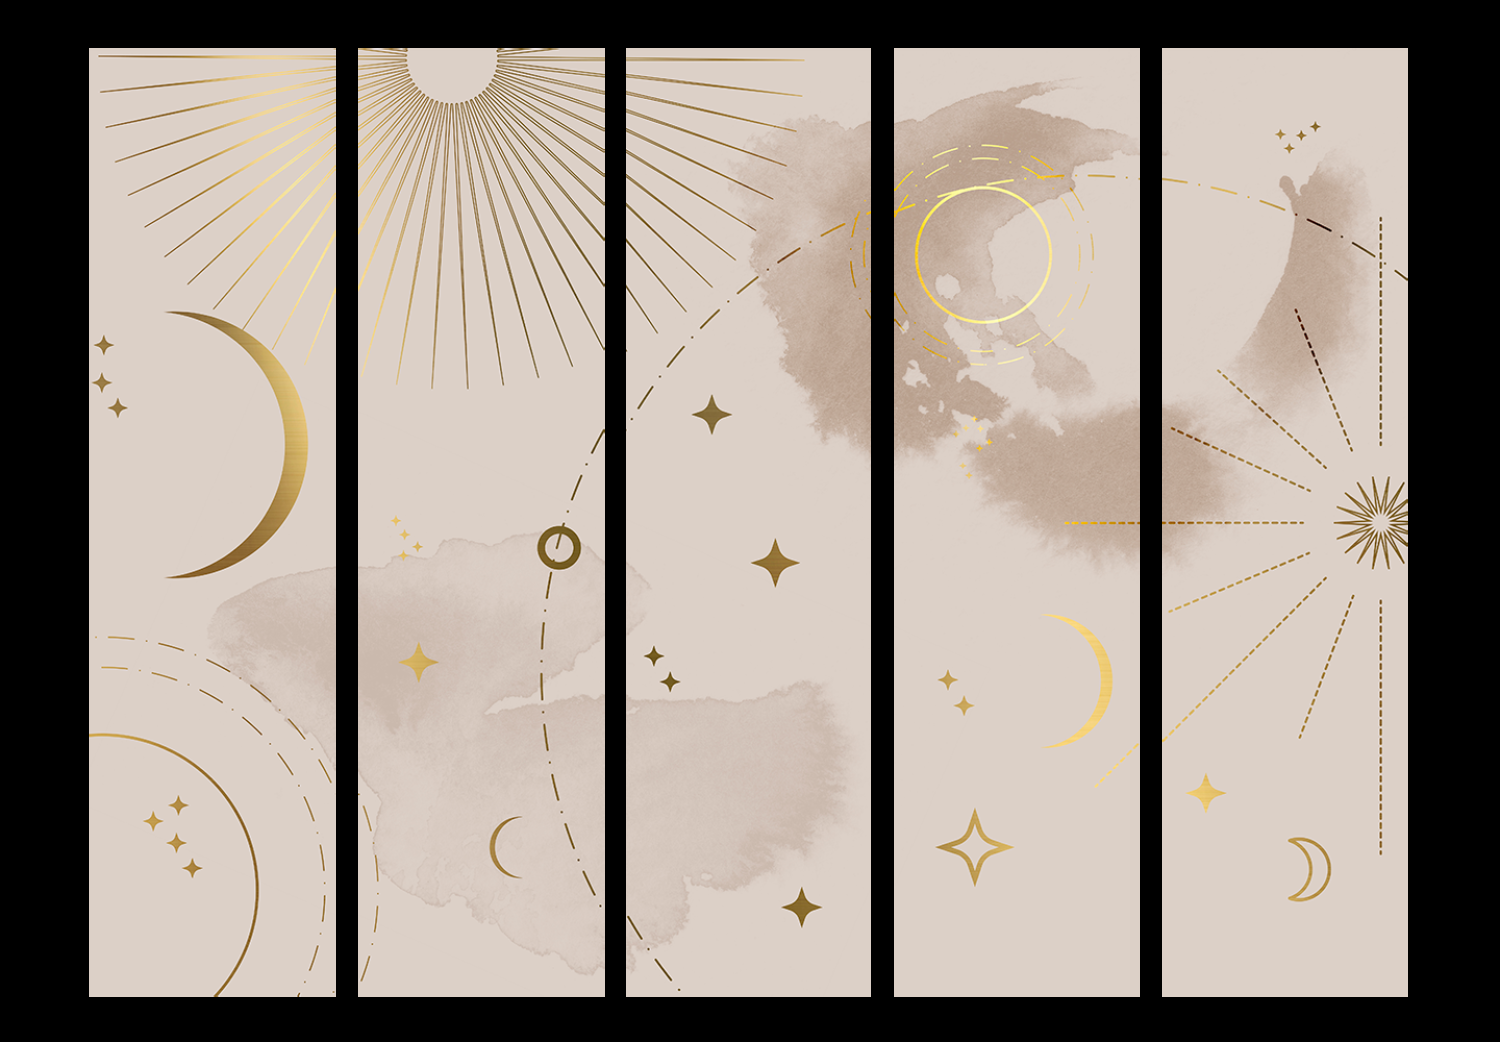 Biombo original Golden Constellation - Geometric Elements of the Sky by Day and Night